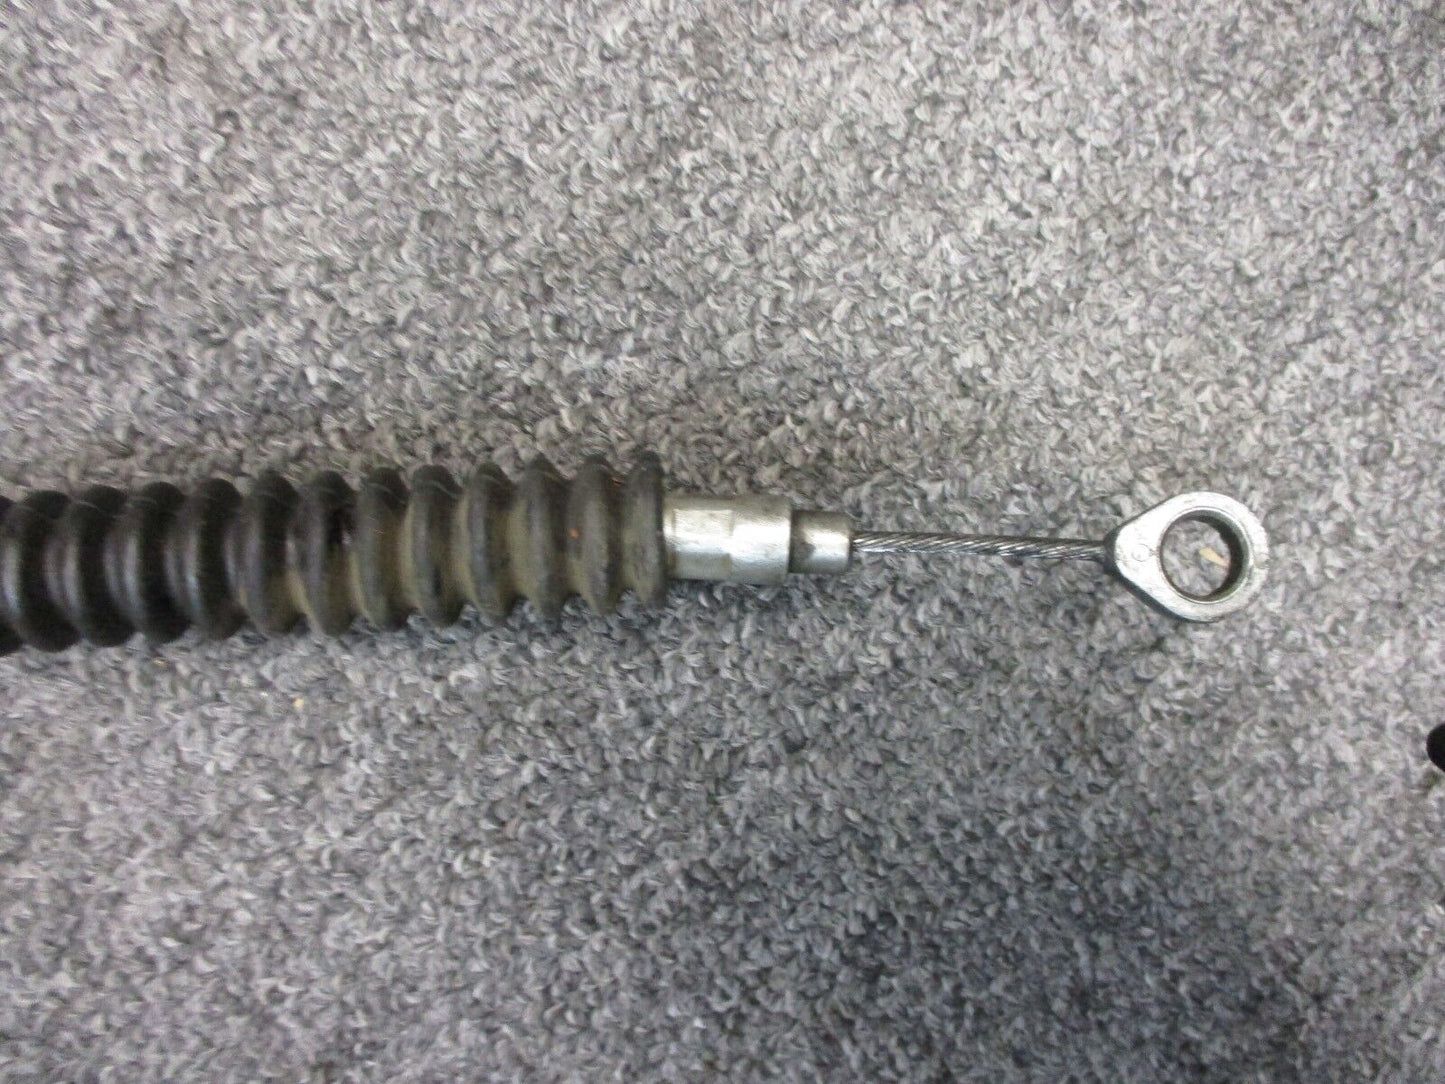 Clutch Cable 60" Length. Fits Harley Davidson.